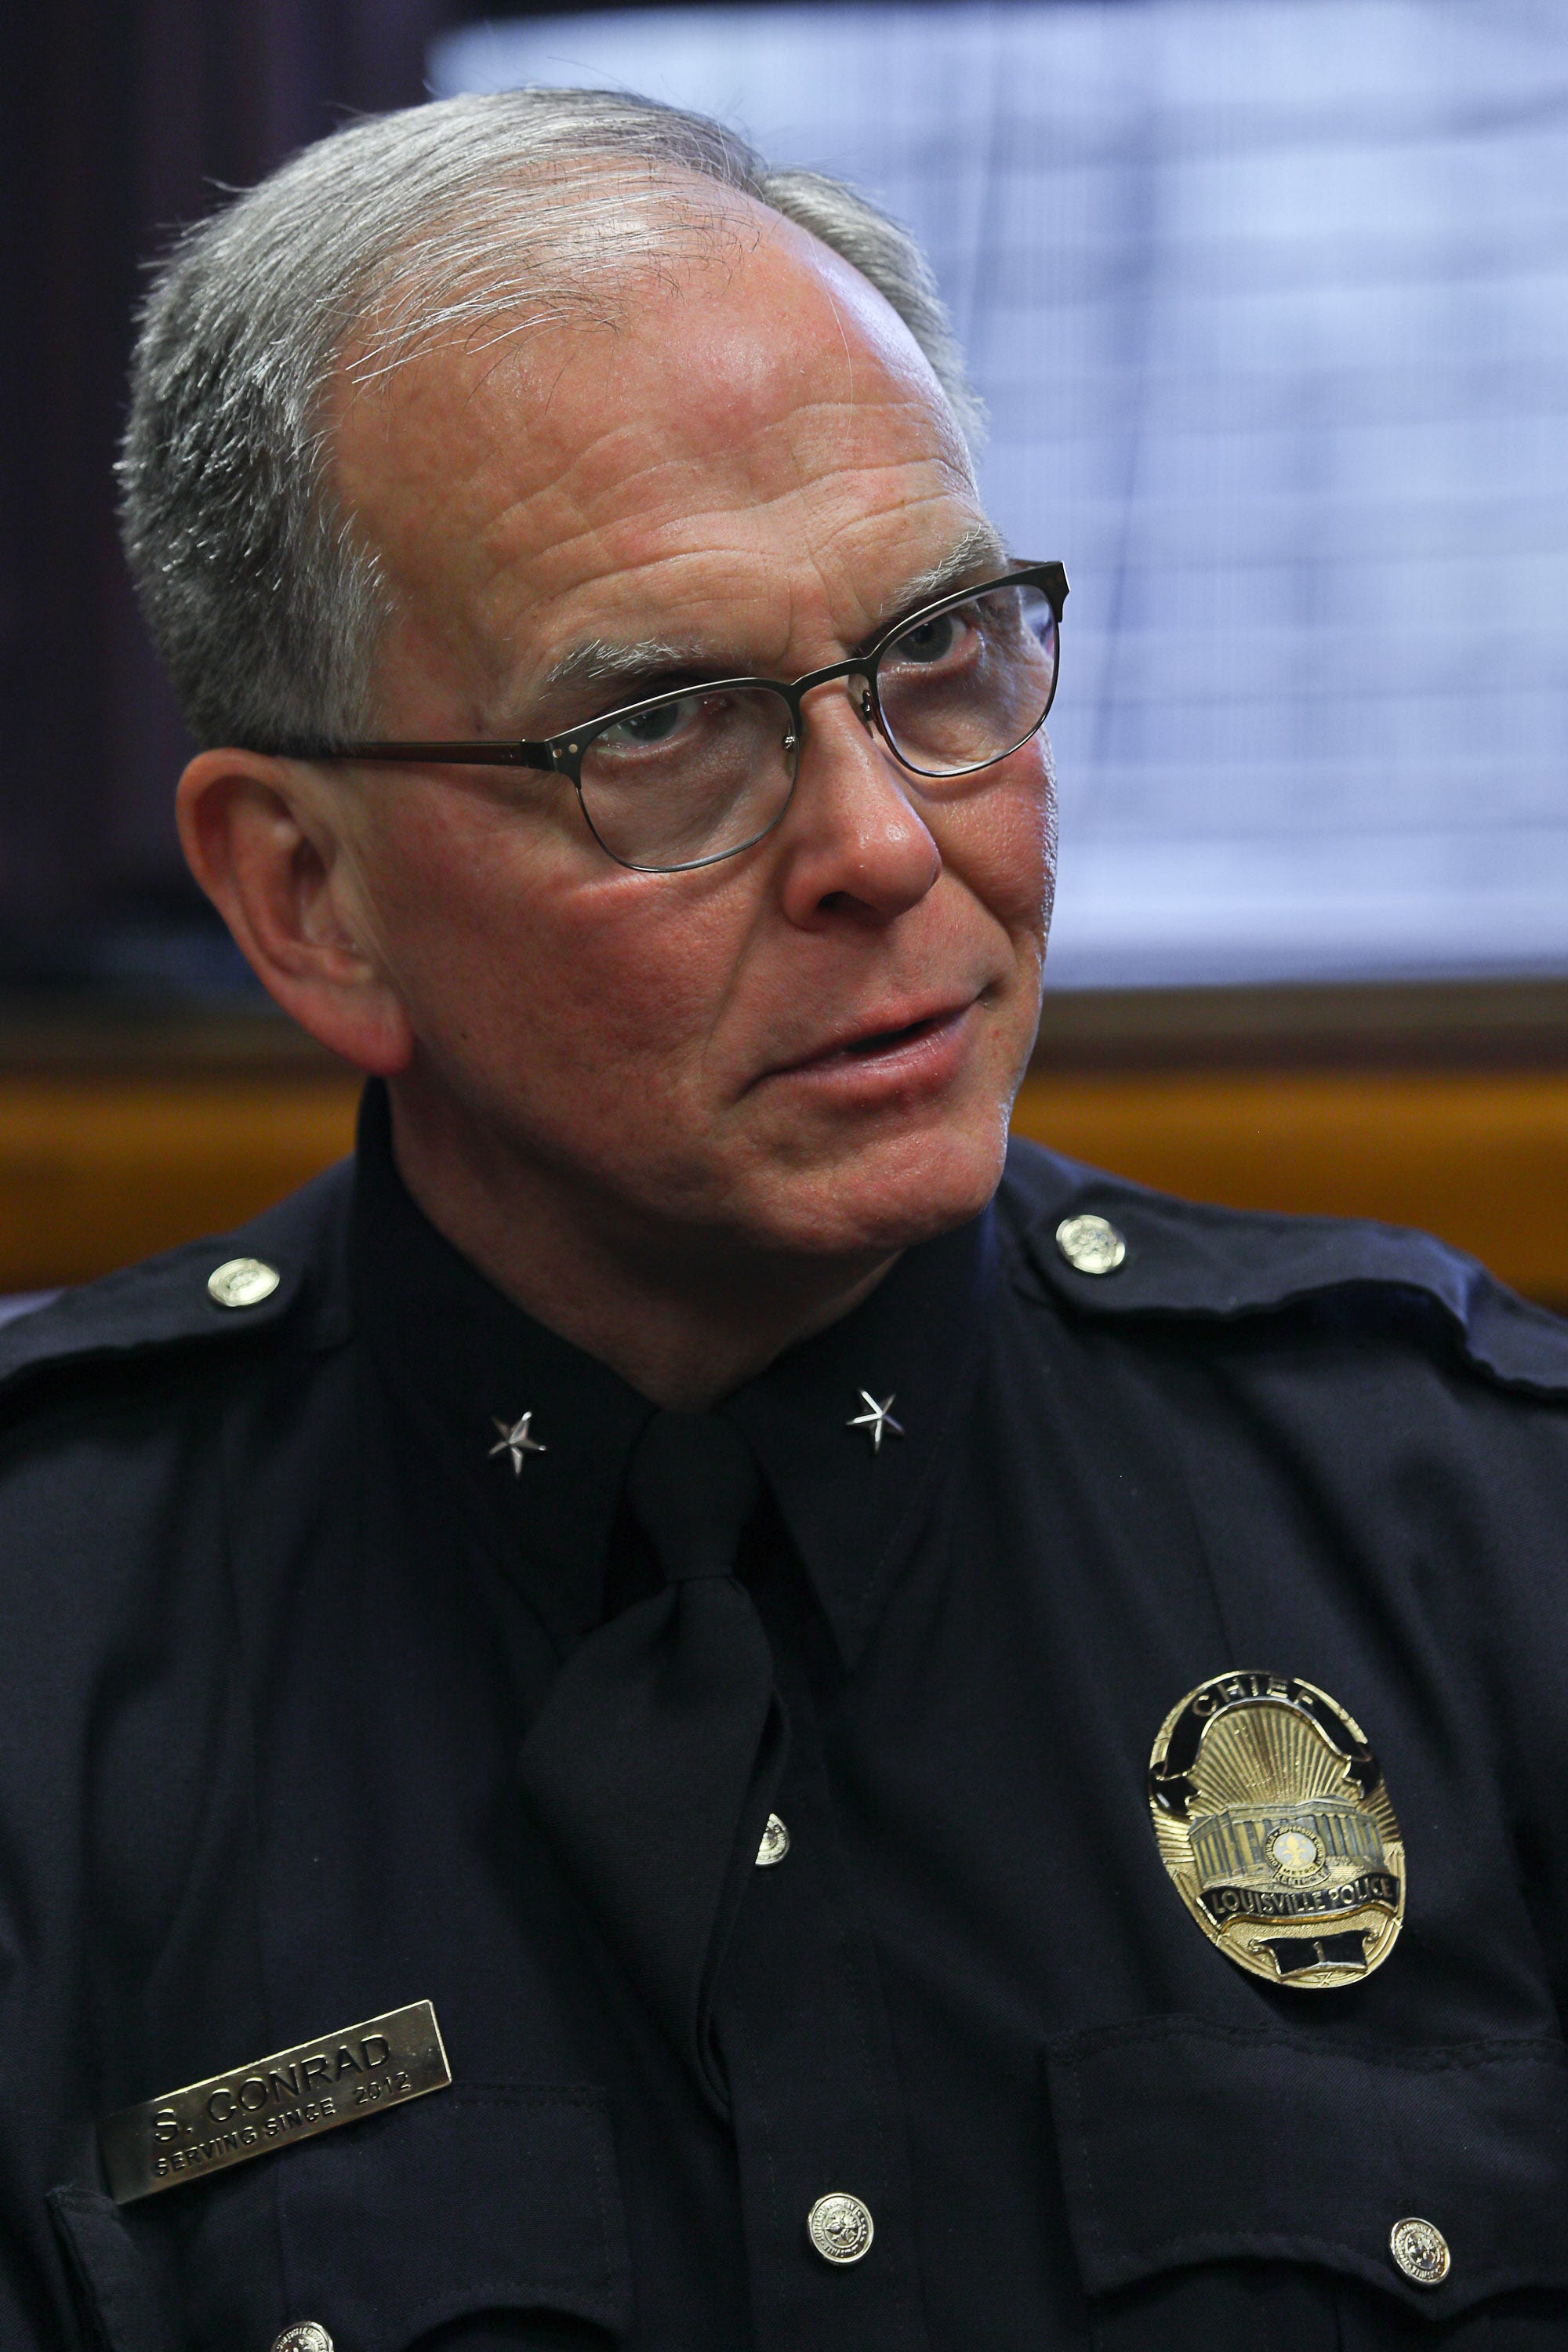 Louisville Metro Police Department Chief Steve Conrad at his office in Louisville, KY. Dec. 12, 2018